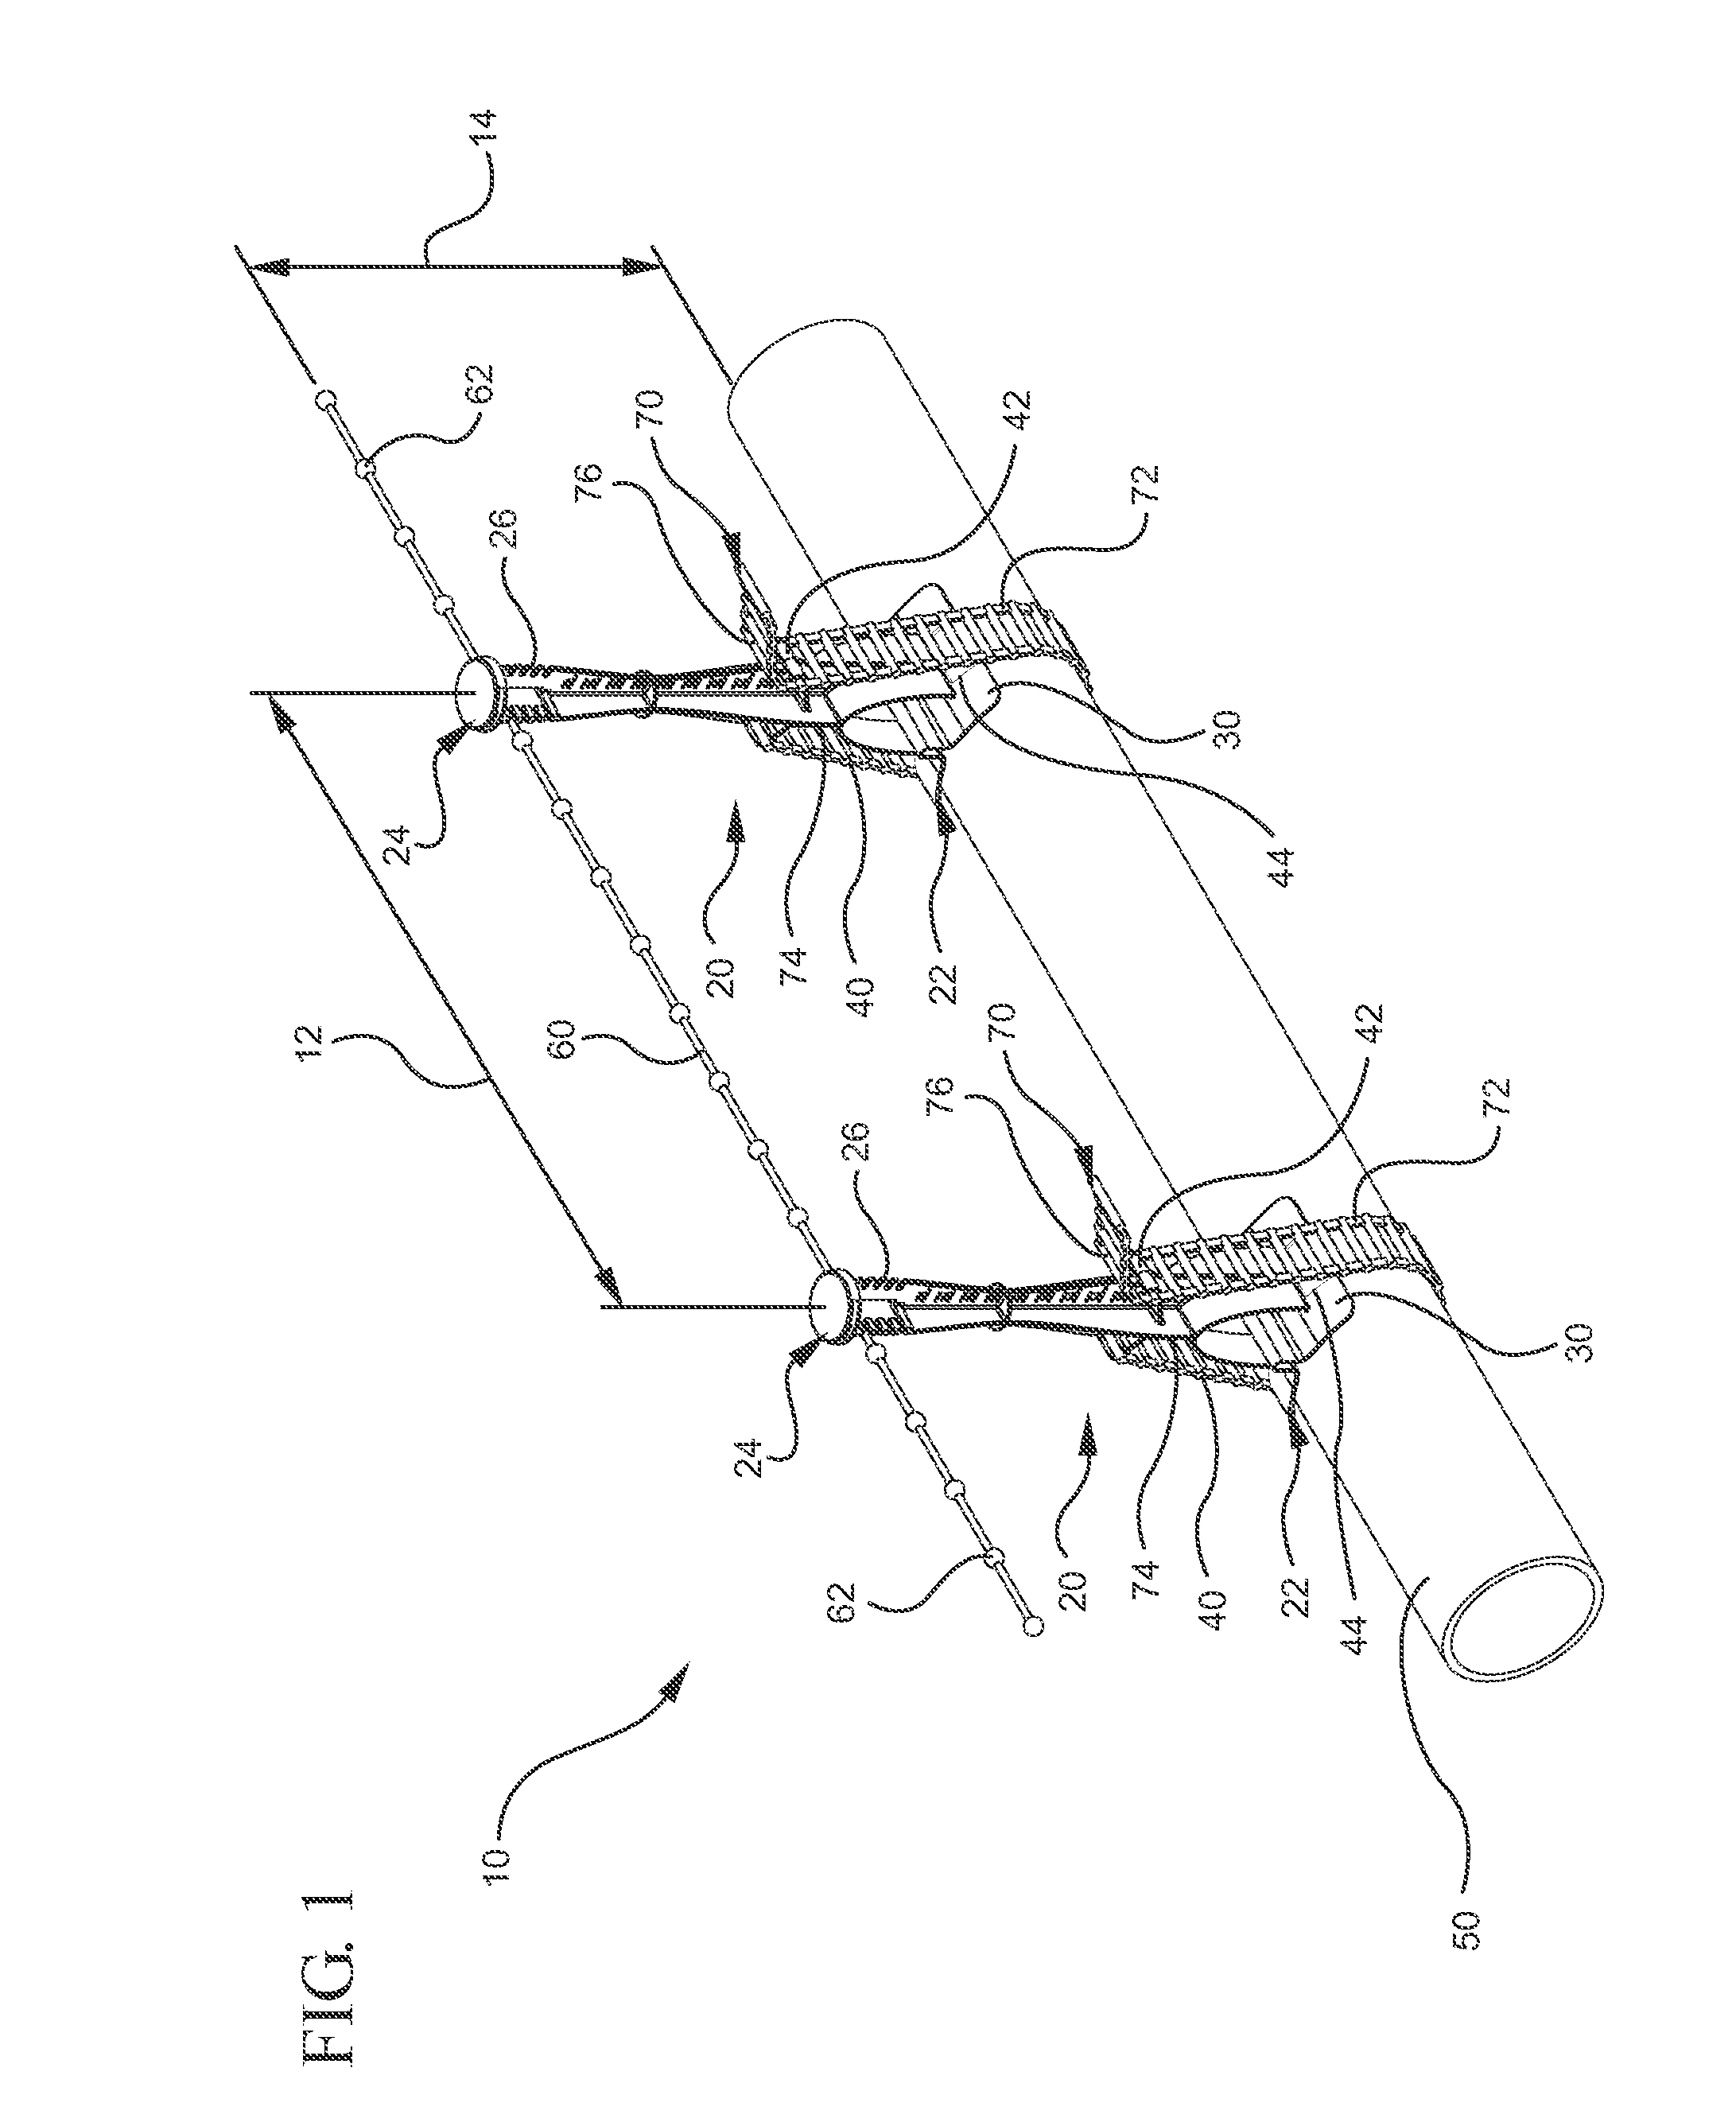 Systems and methods for marking and detecting an underground utility